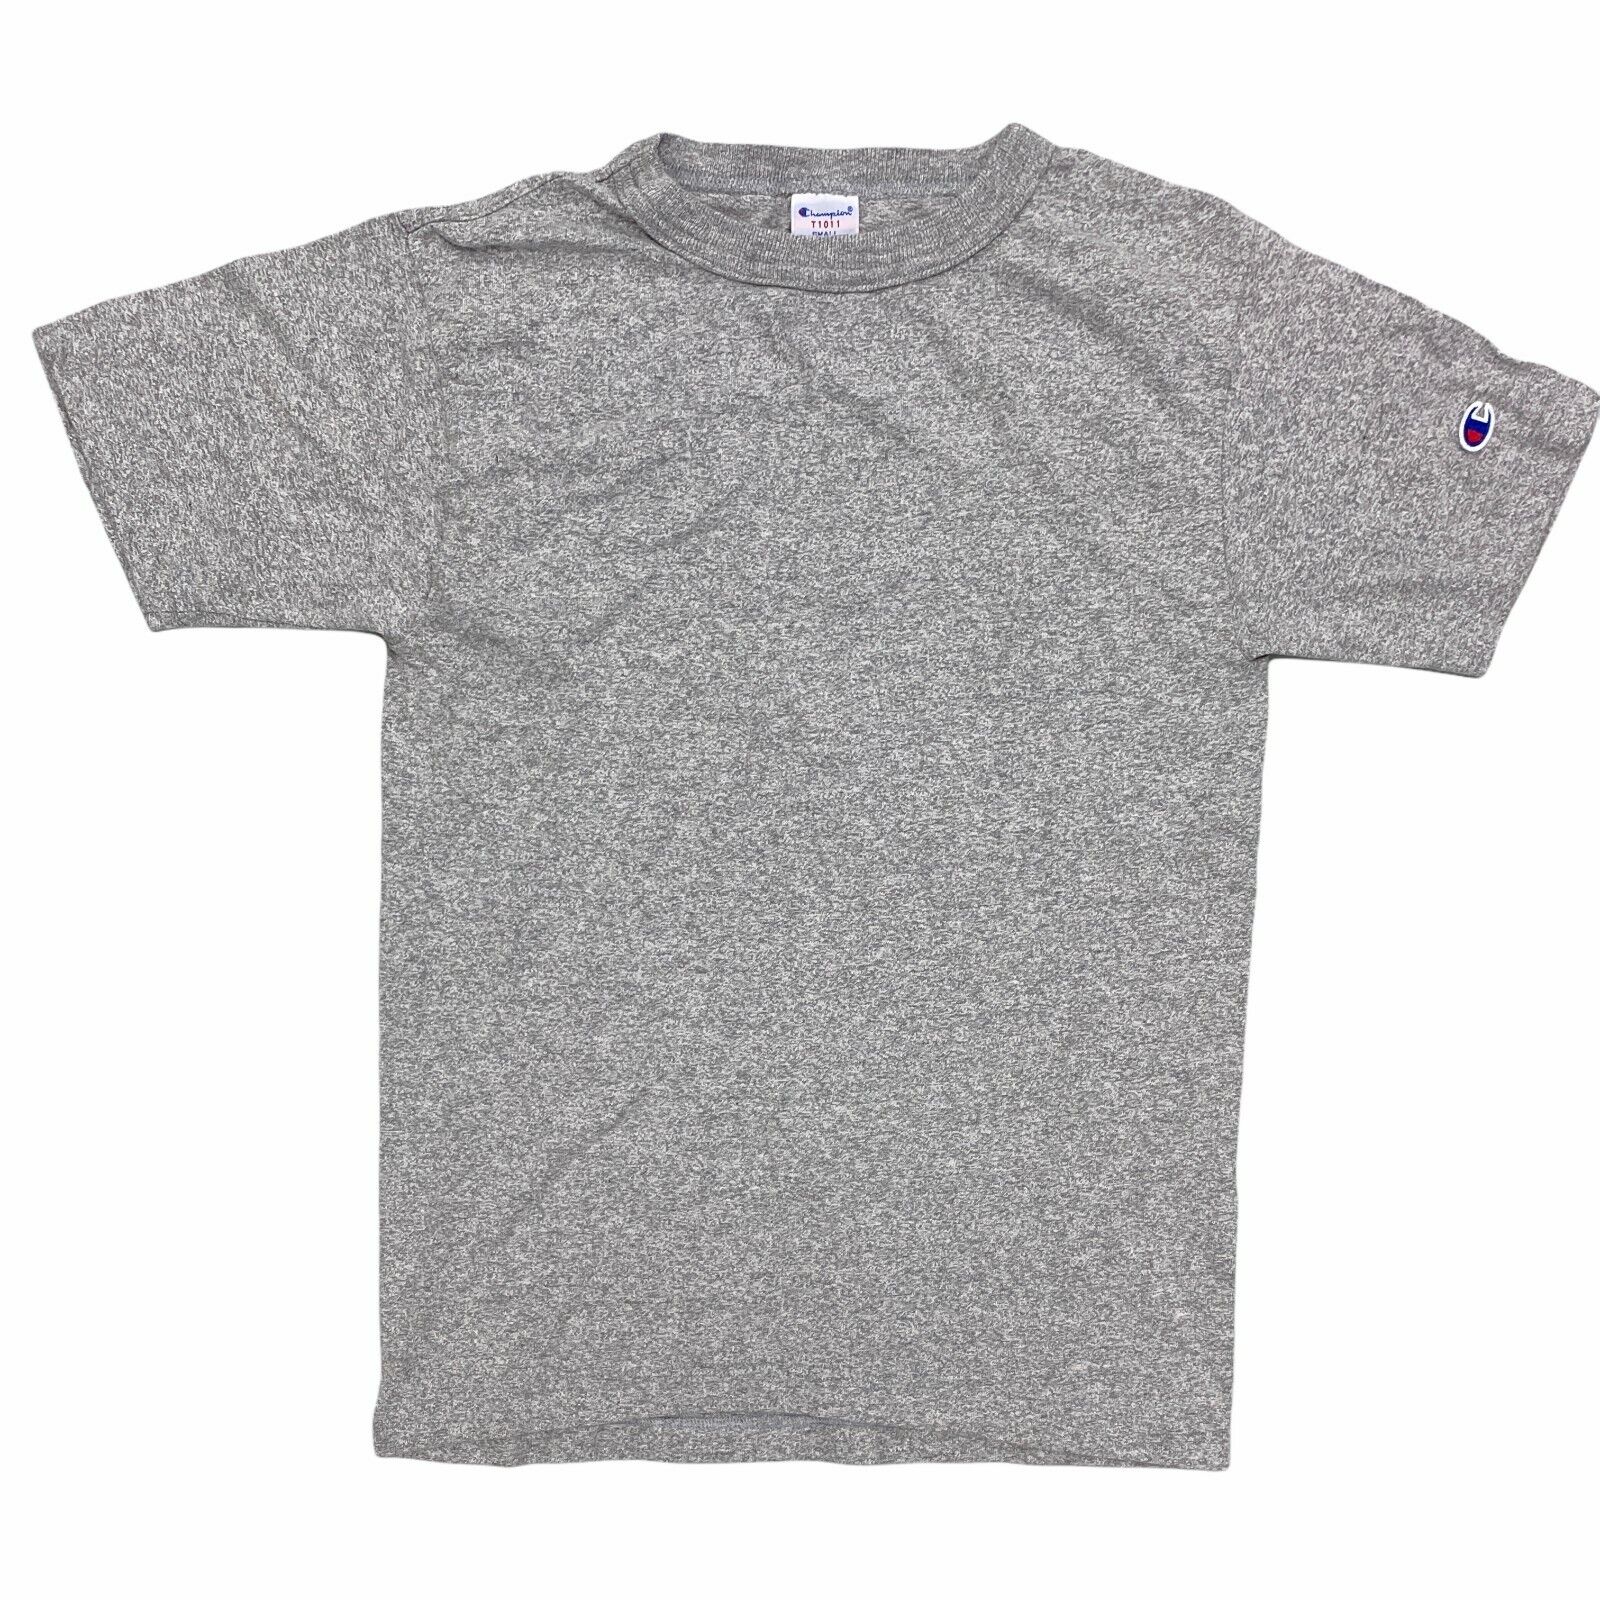 Deadstock Champion T1011 Heavyweight Jersey T-Shirt Size S MADE IN USA Grey  S/S